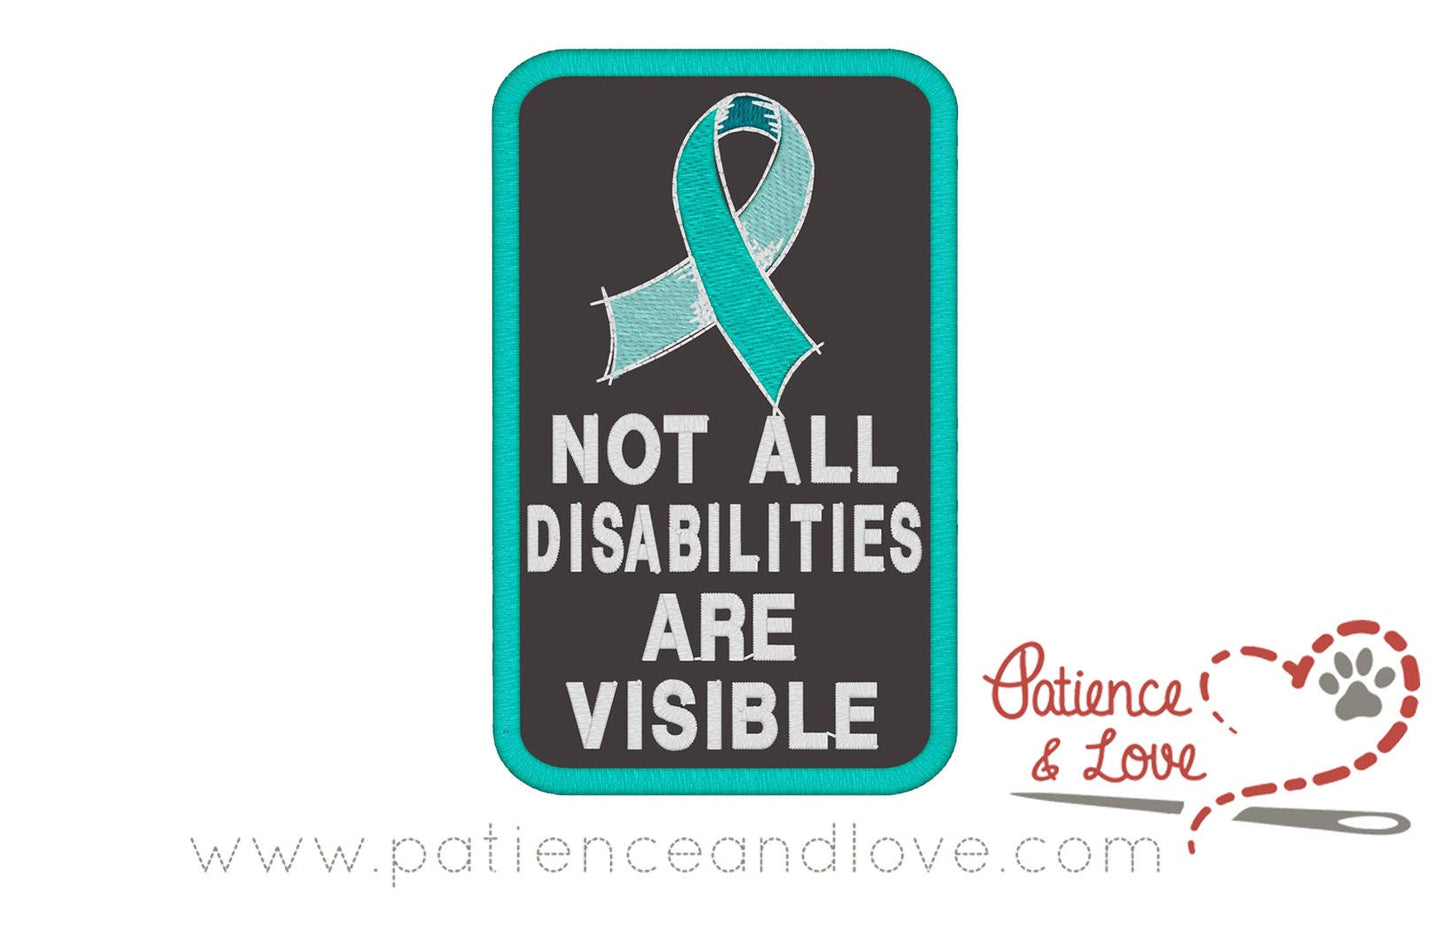 Not all disabilities are visible with ribbon, 2.5 x 4 inch rectangular patch